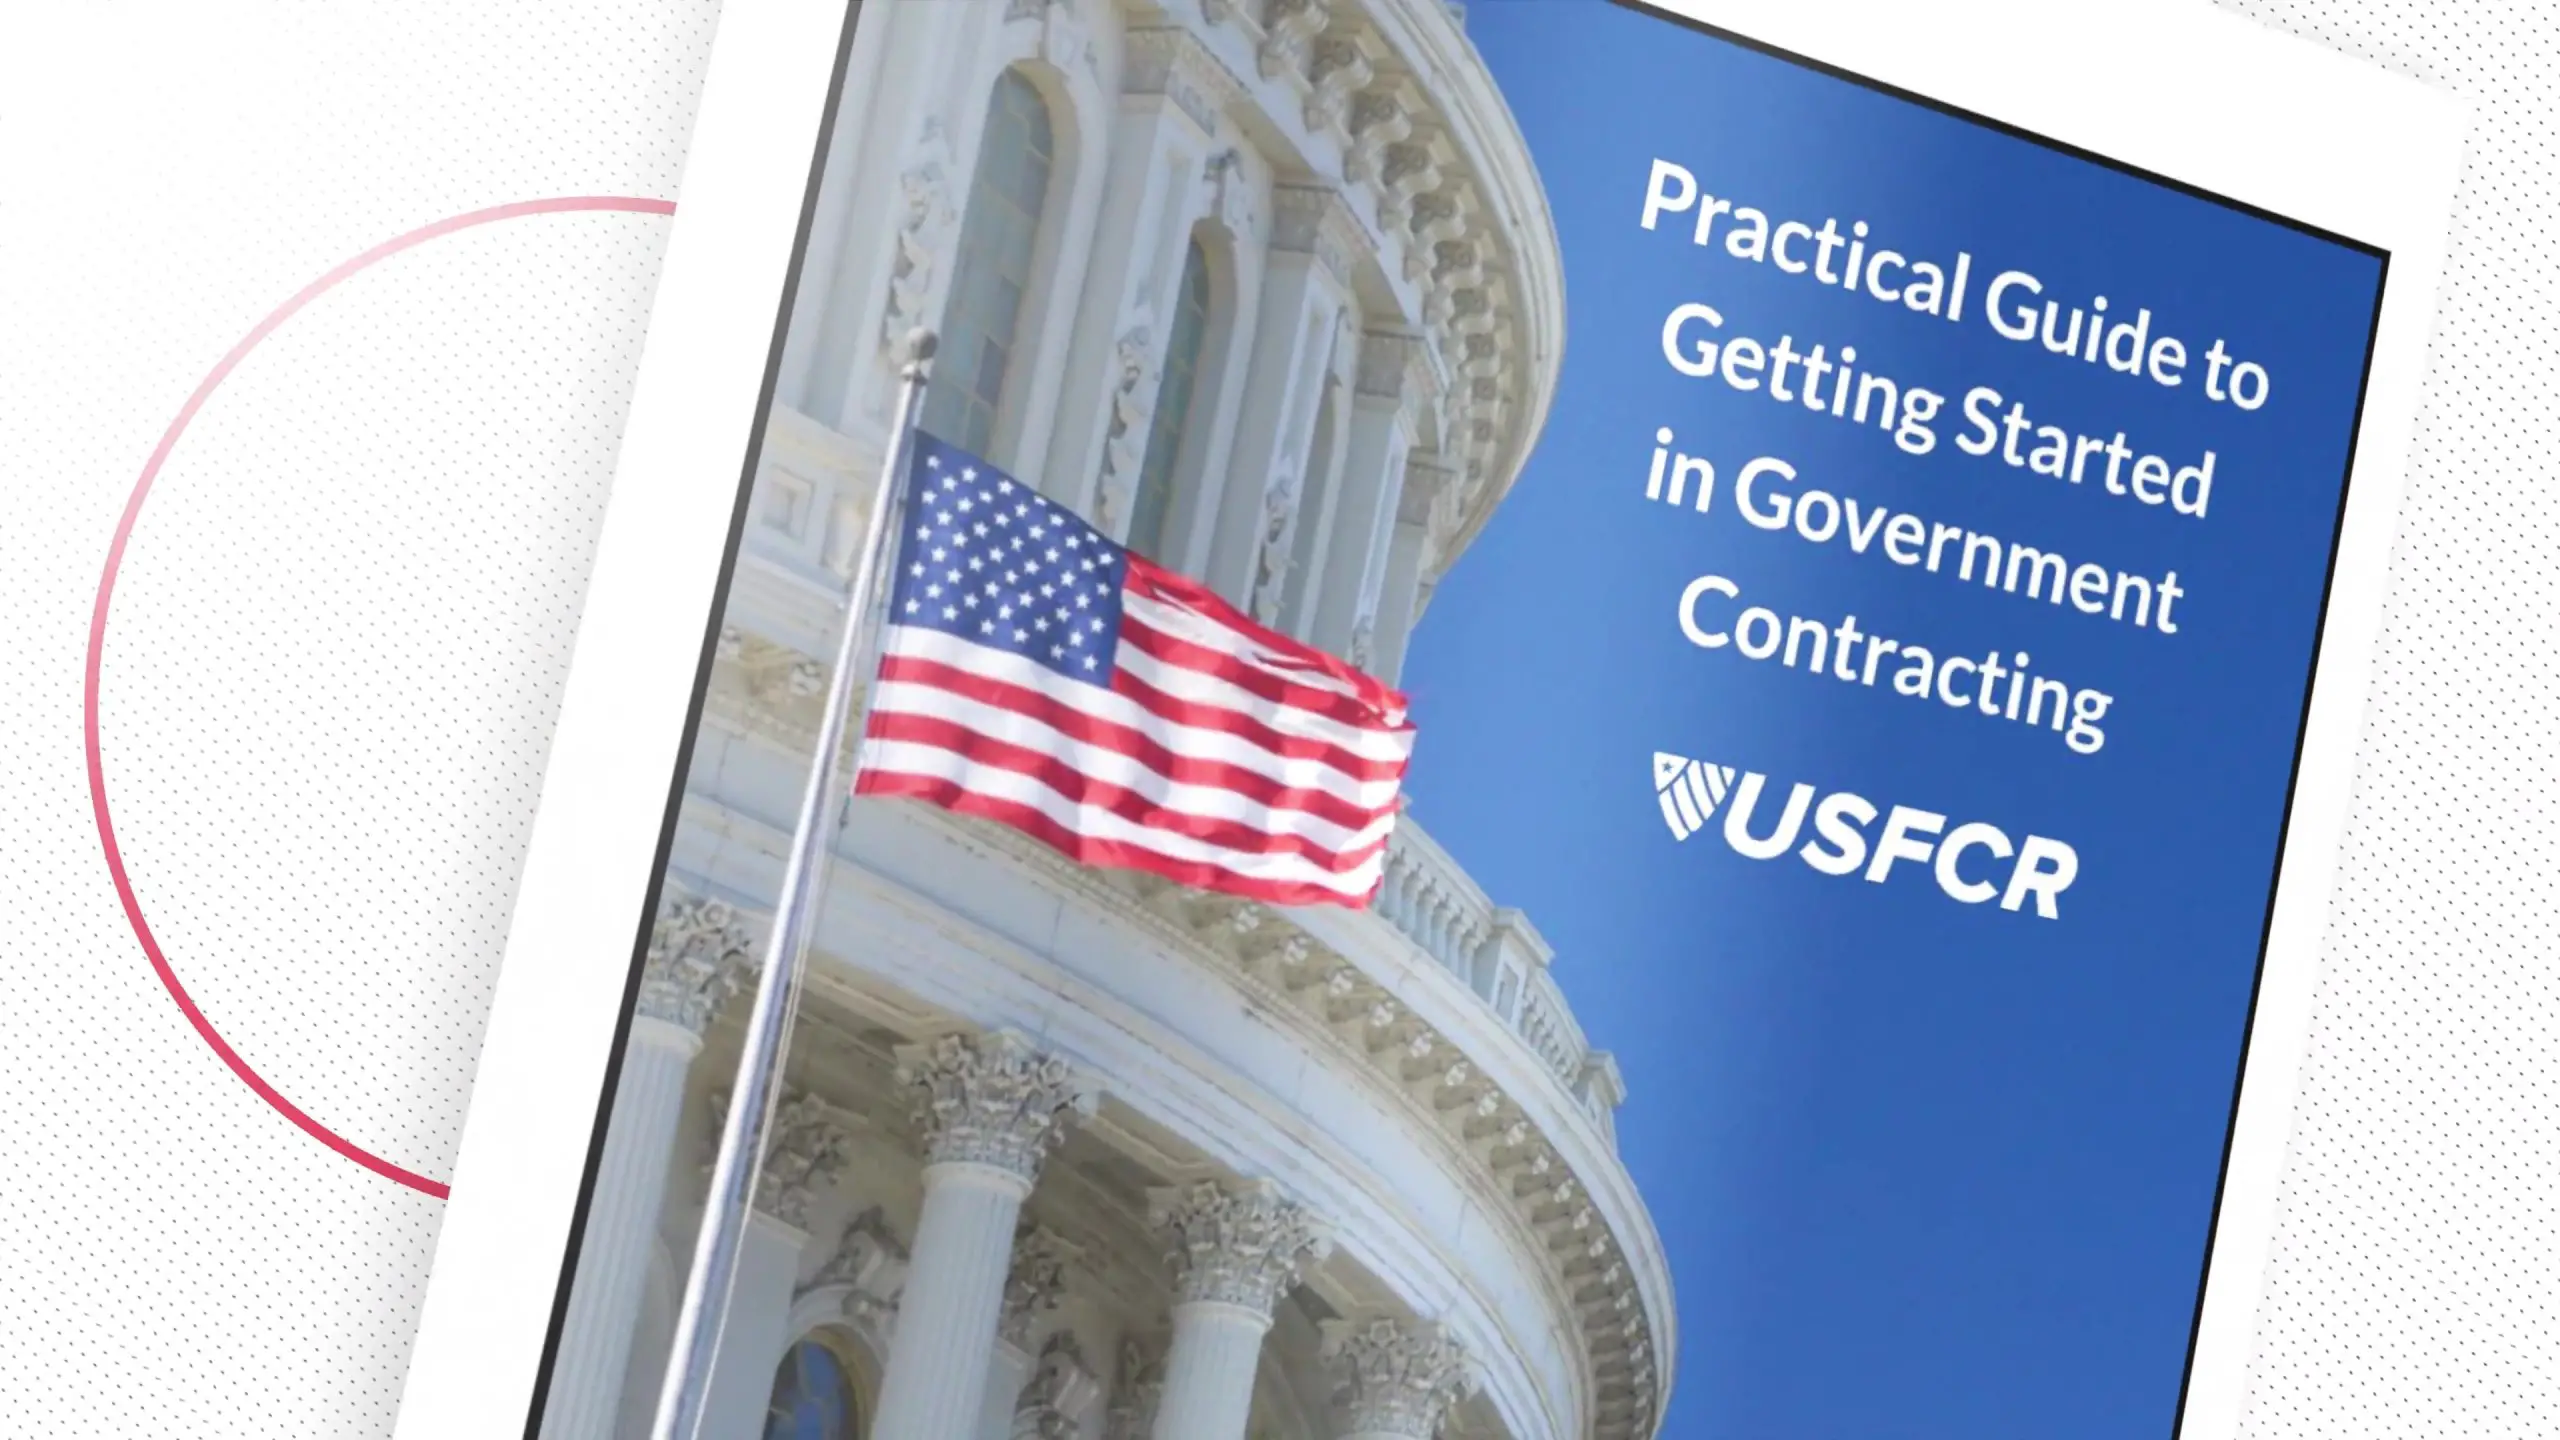 Practical Guide to Starting in Government Contracting